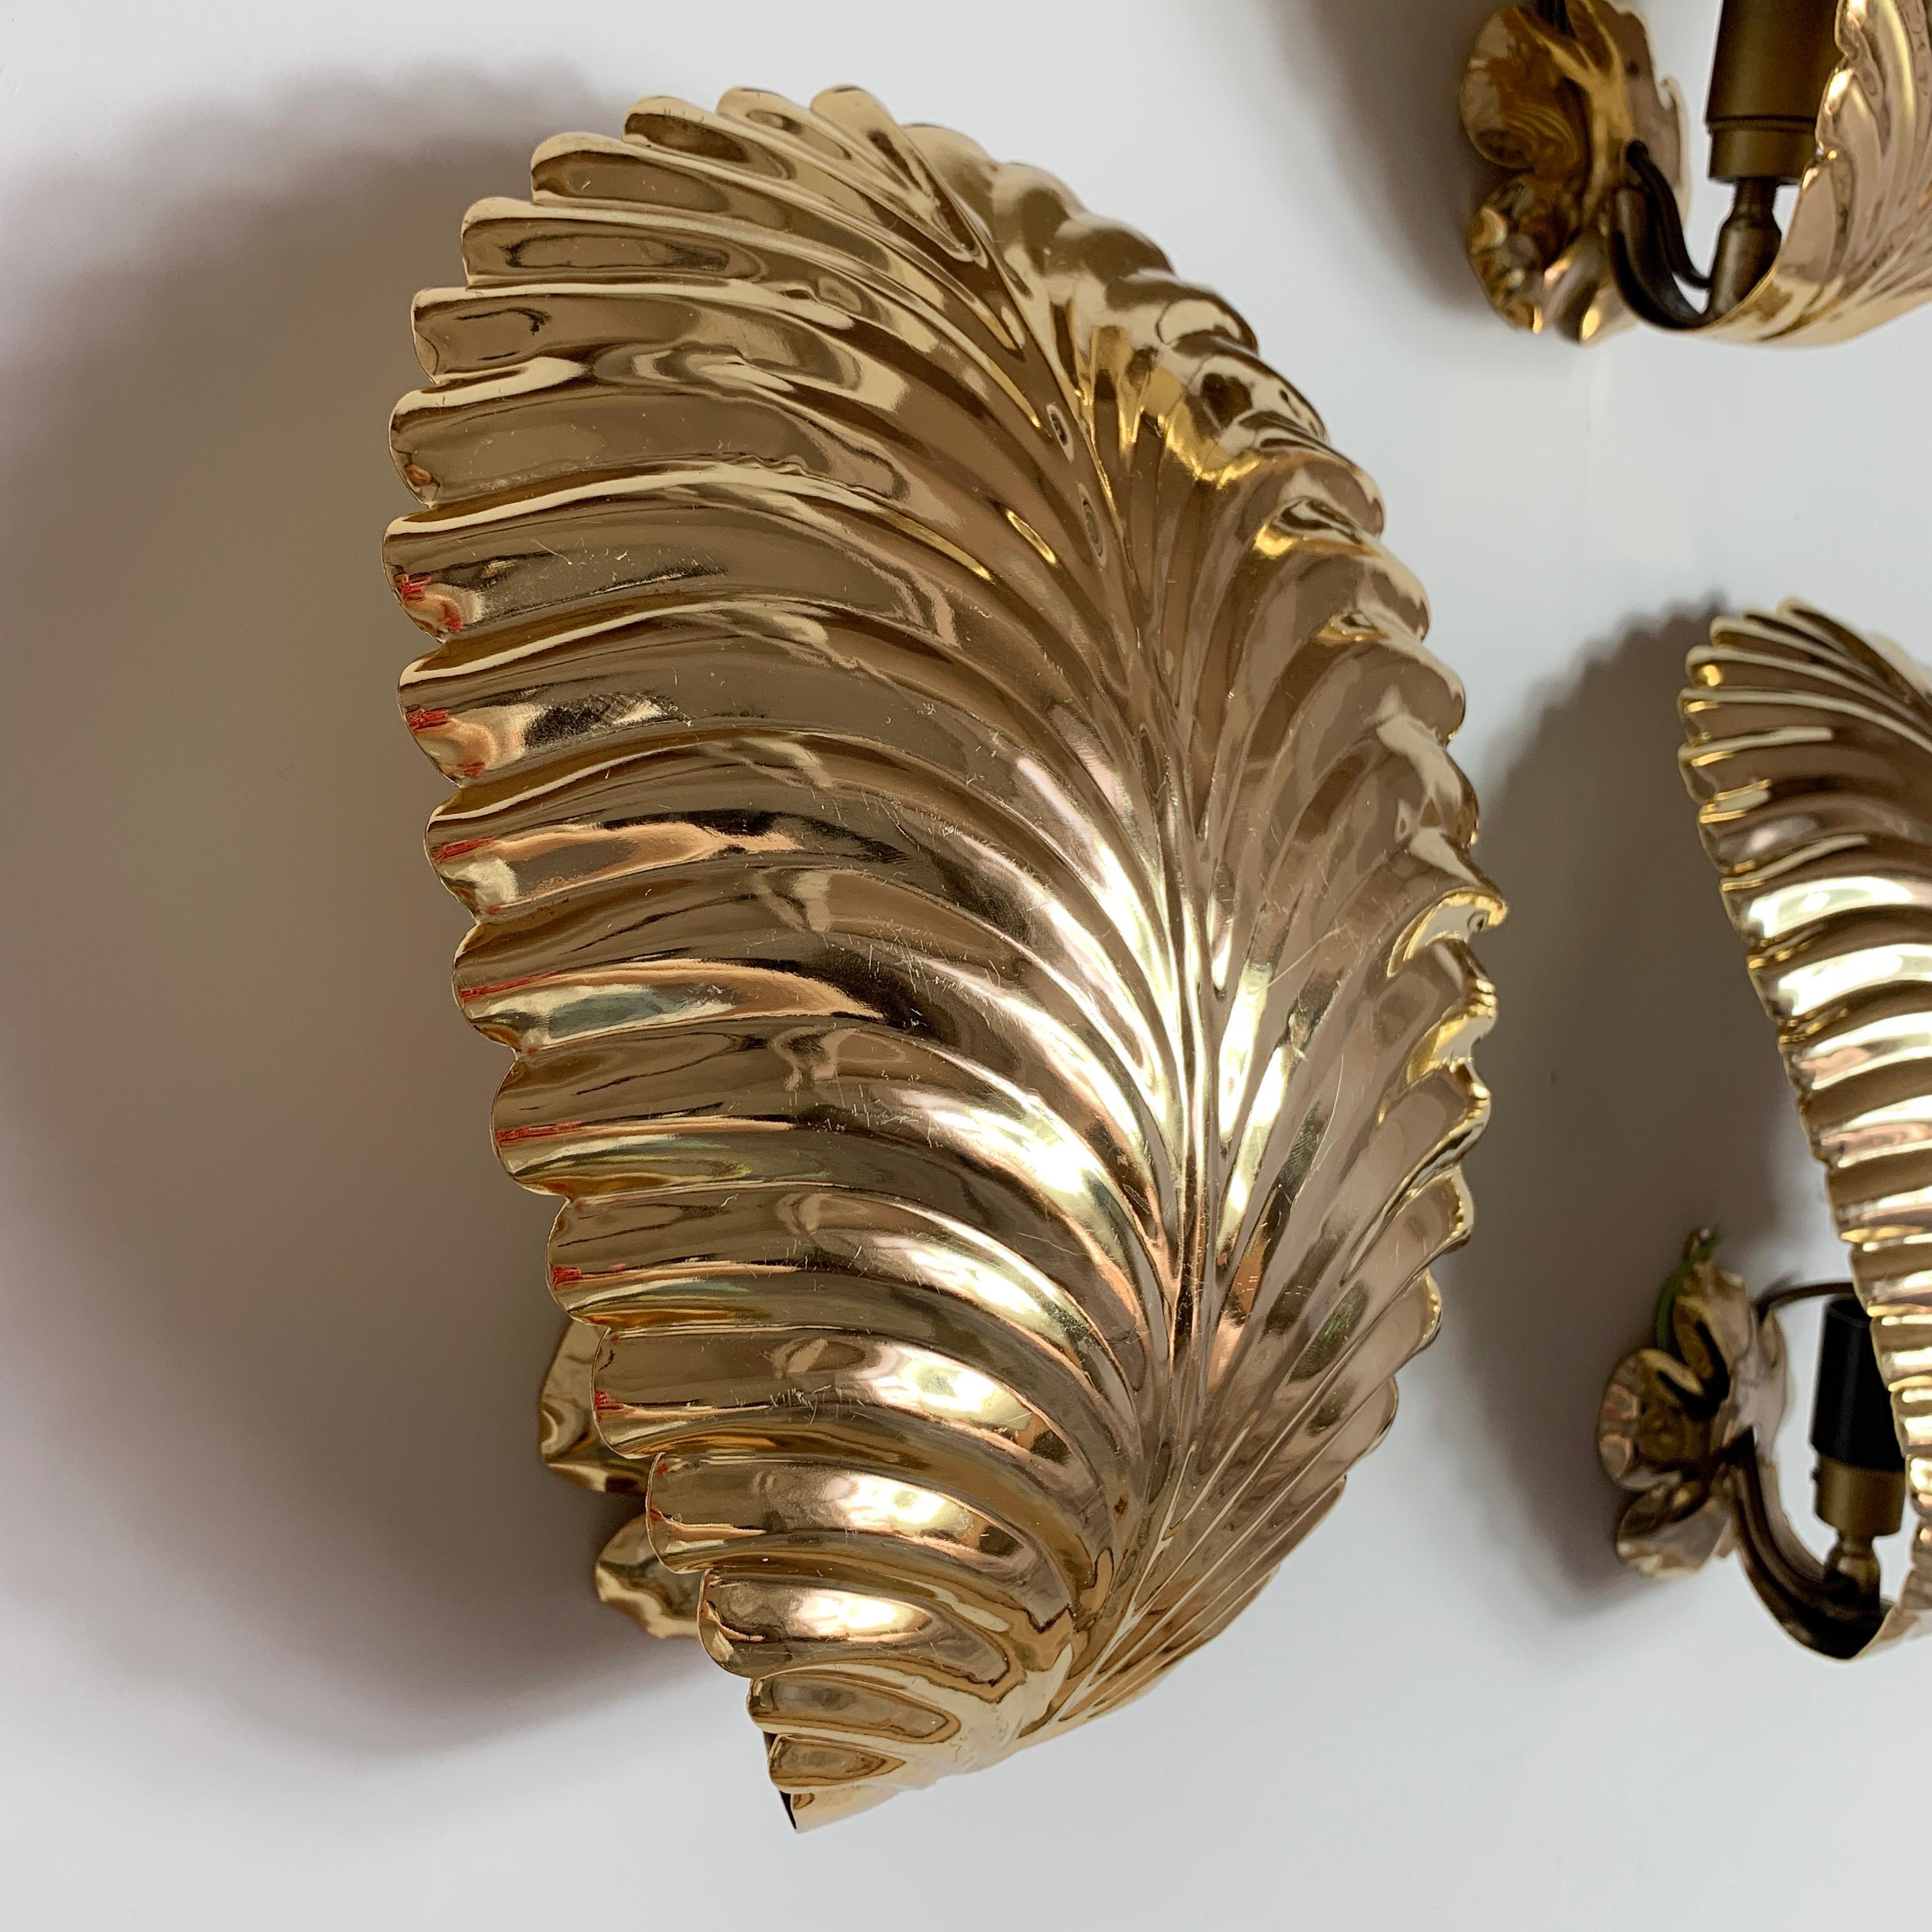 Set of 3 gold palm leaf wall lights.
1980s.
3 large individual shiny gold metal palm leaves.
Behind each leaf a single E27 bulb holder is hidden.
There is a ring hanging hook on the back of each light to attach to the wall.
Measures: 19.5cm